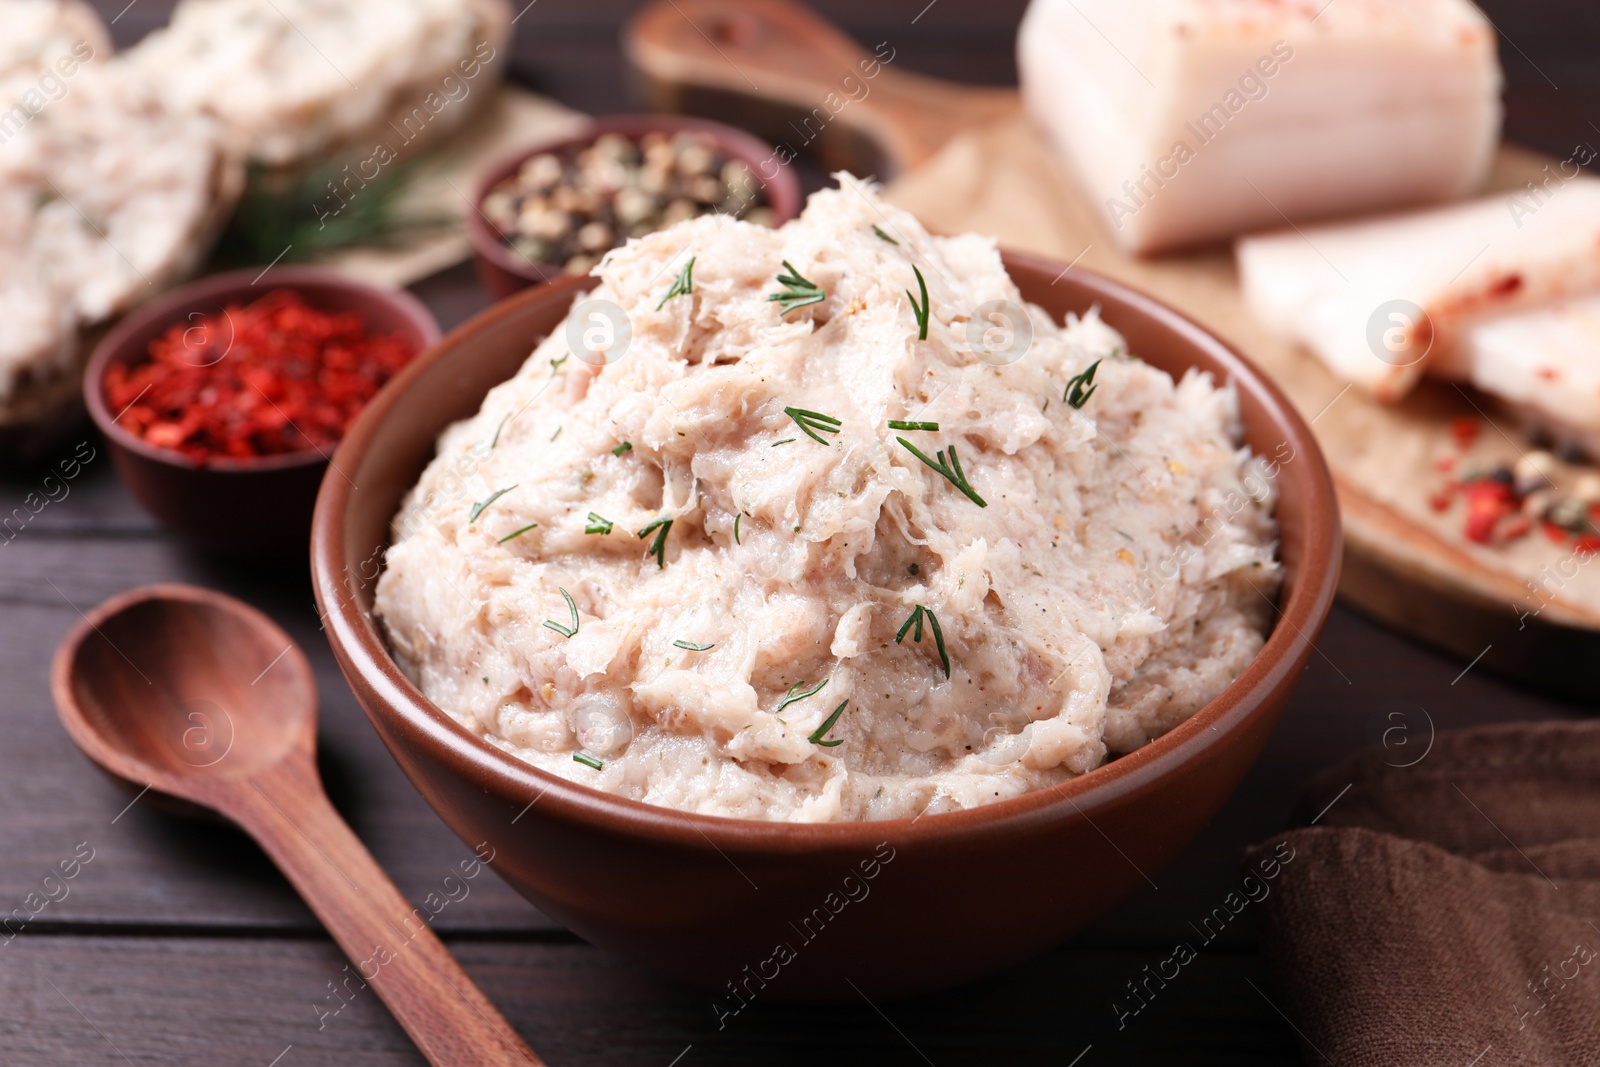 Photo of Delicious lard spread served on wooden table